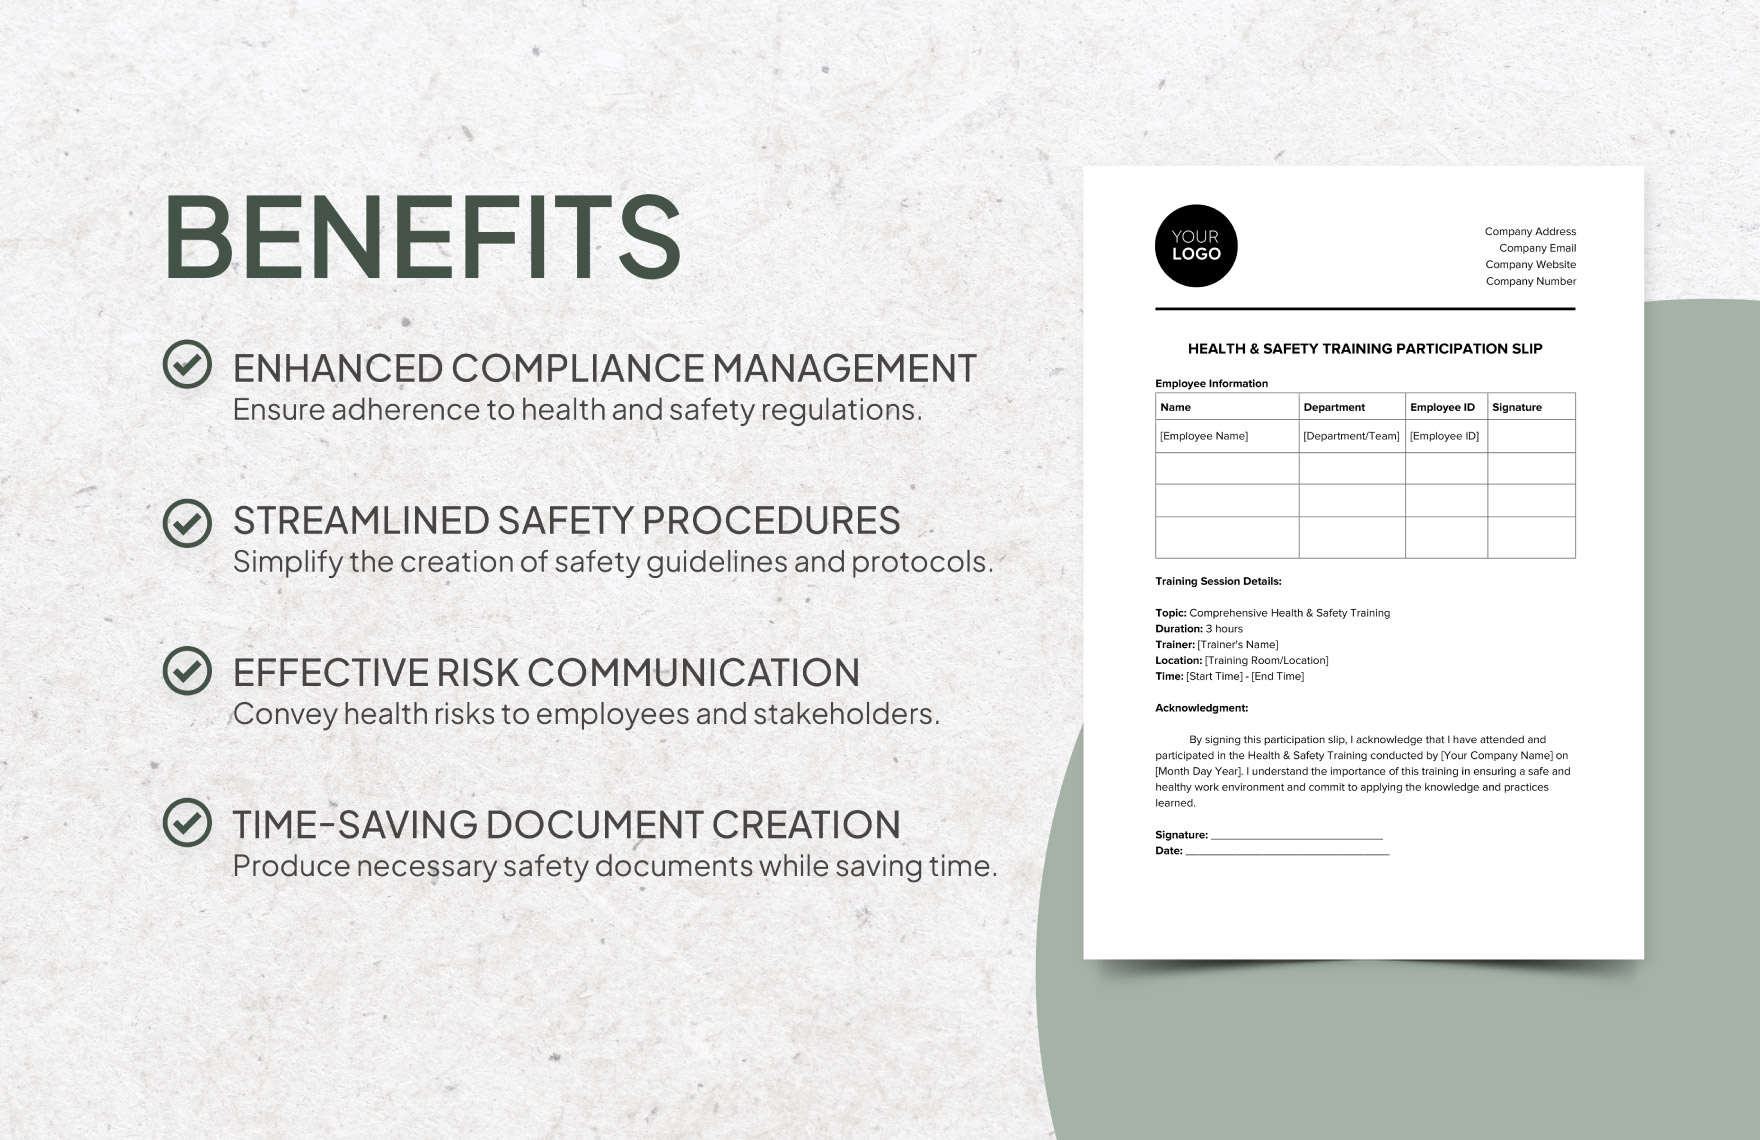 Health & Safety Training Participation Slip Template